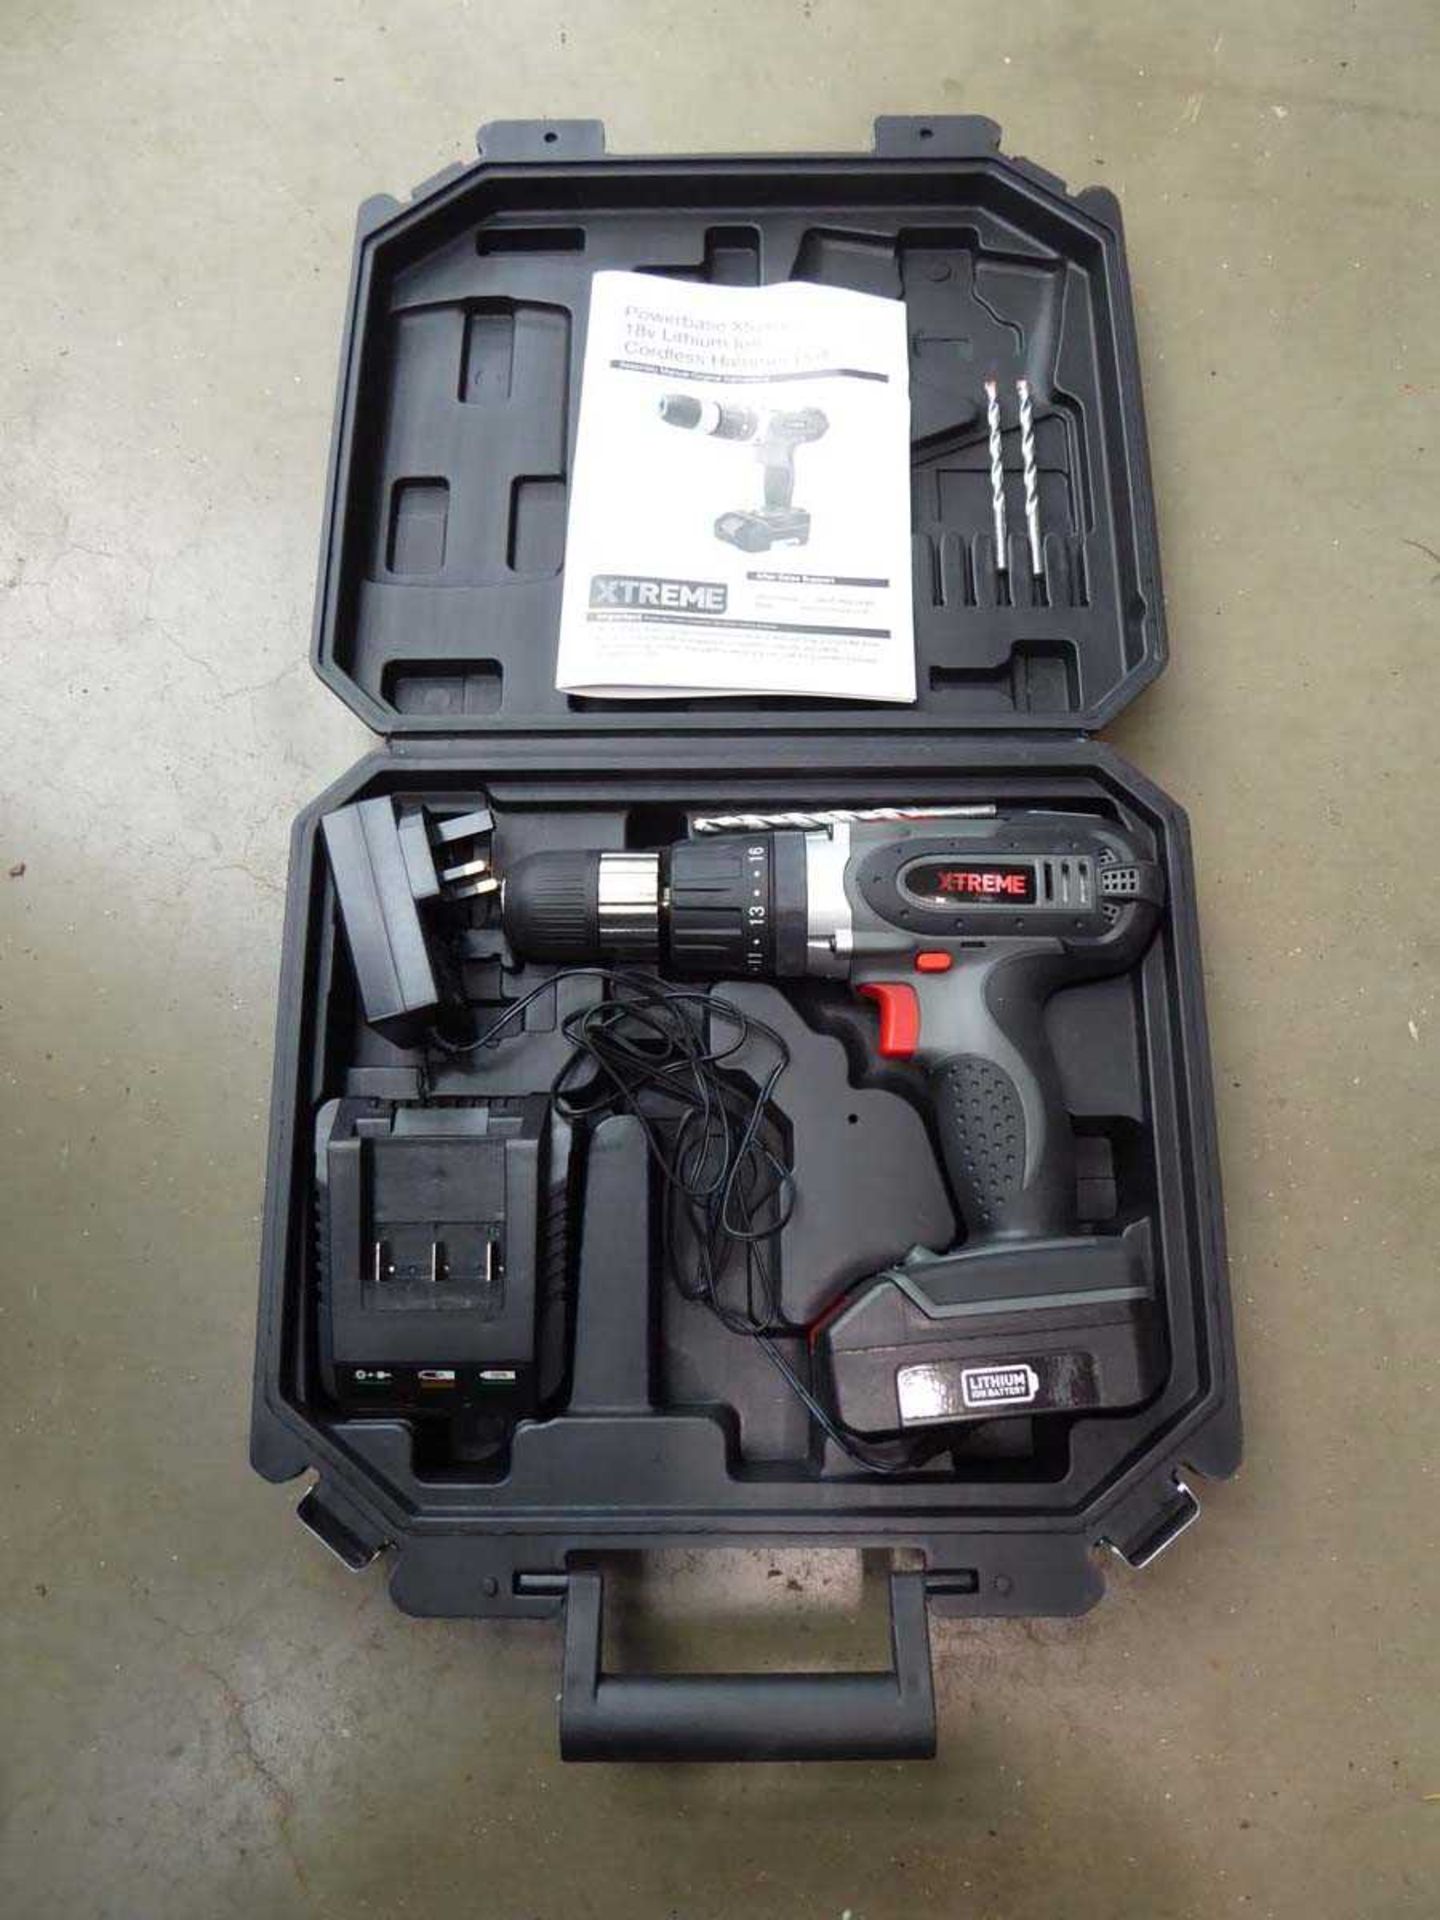 Powerbase Extreme battery drill with battery and charger